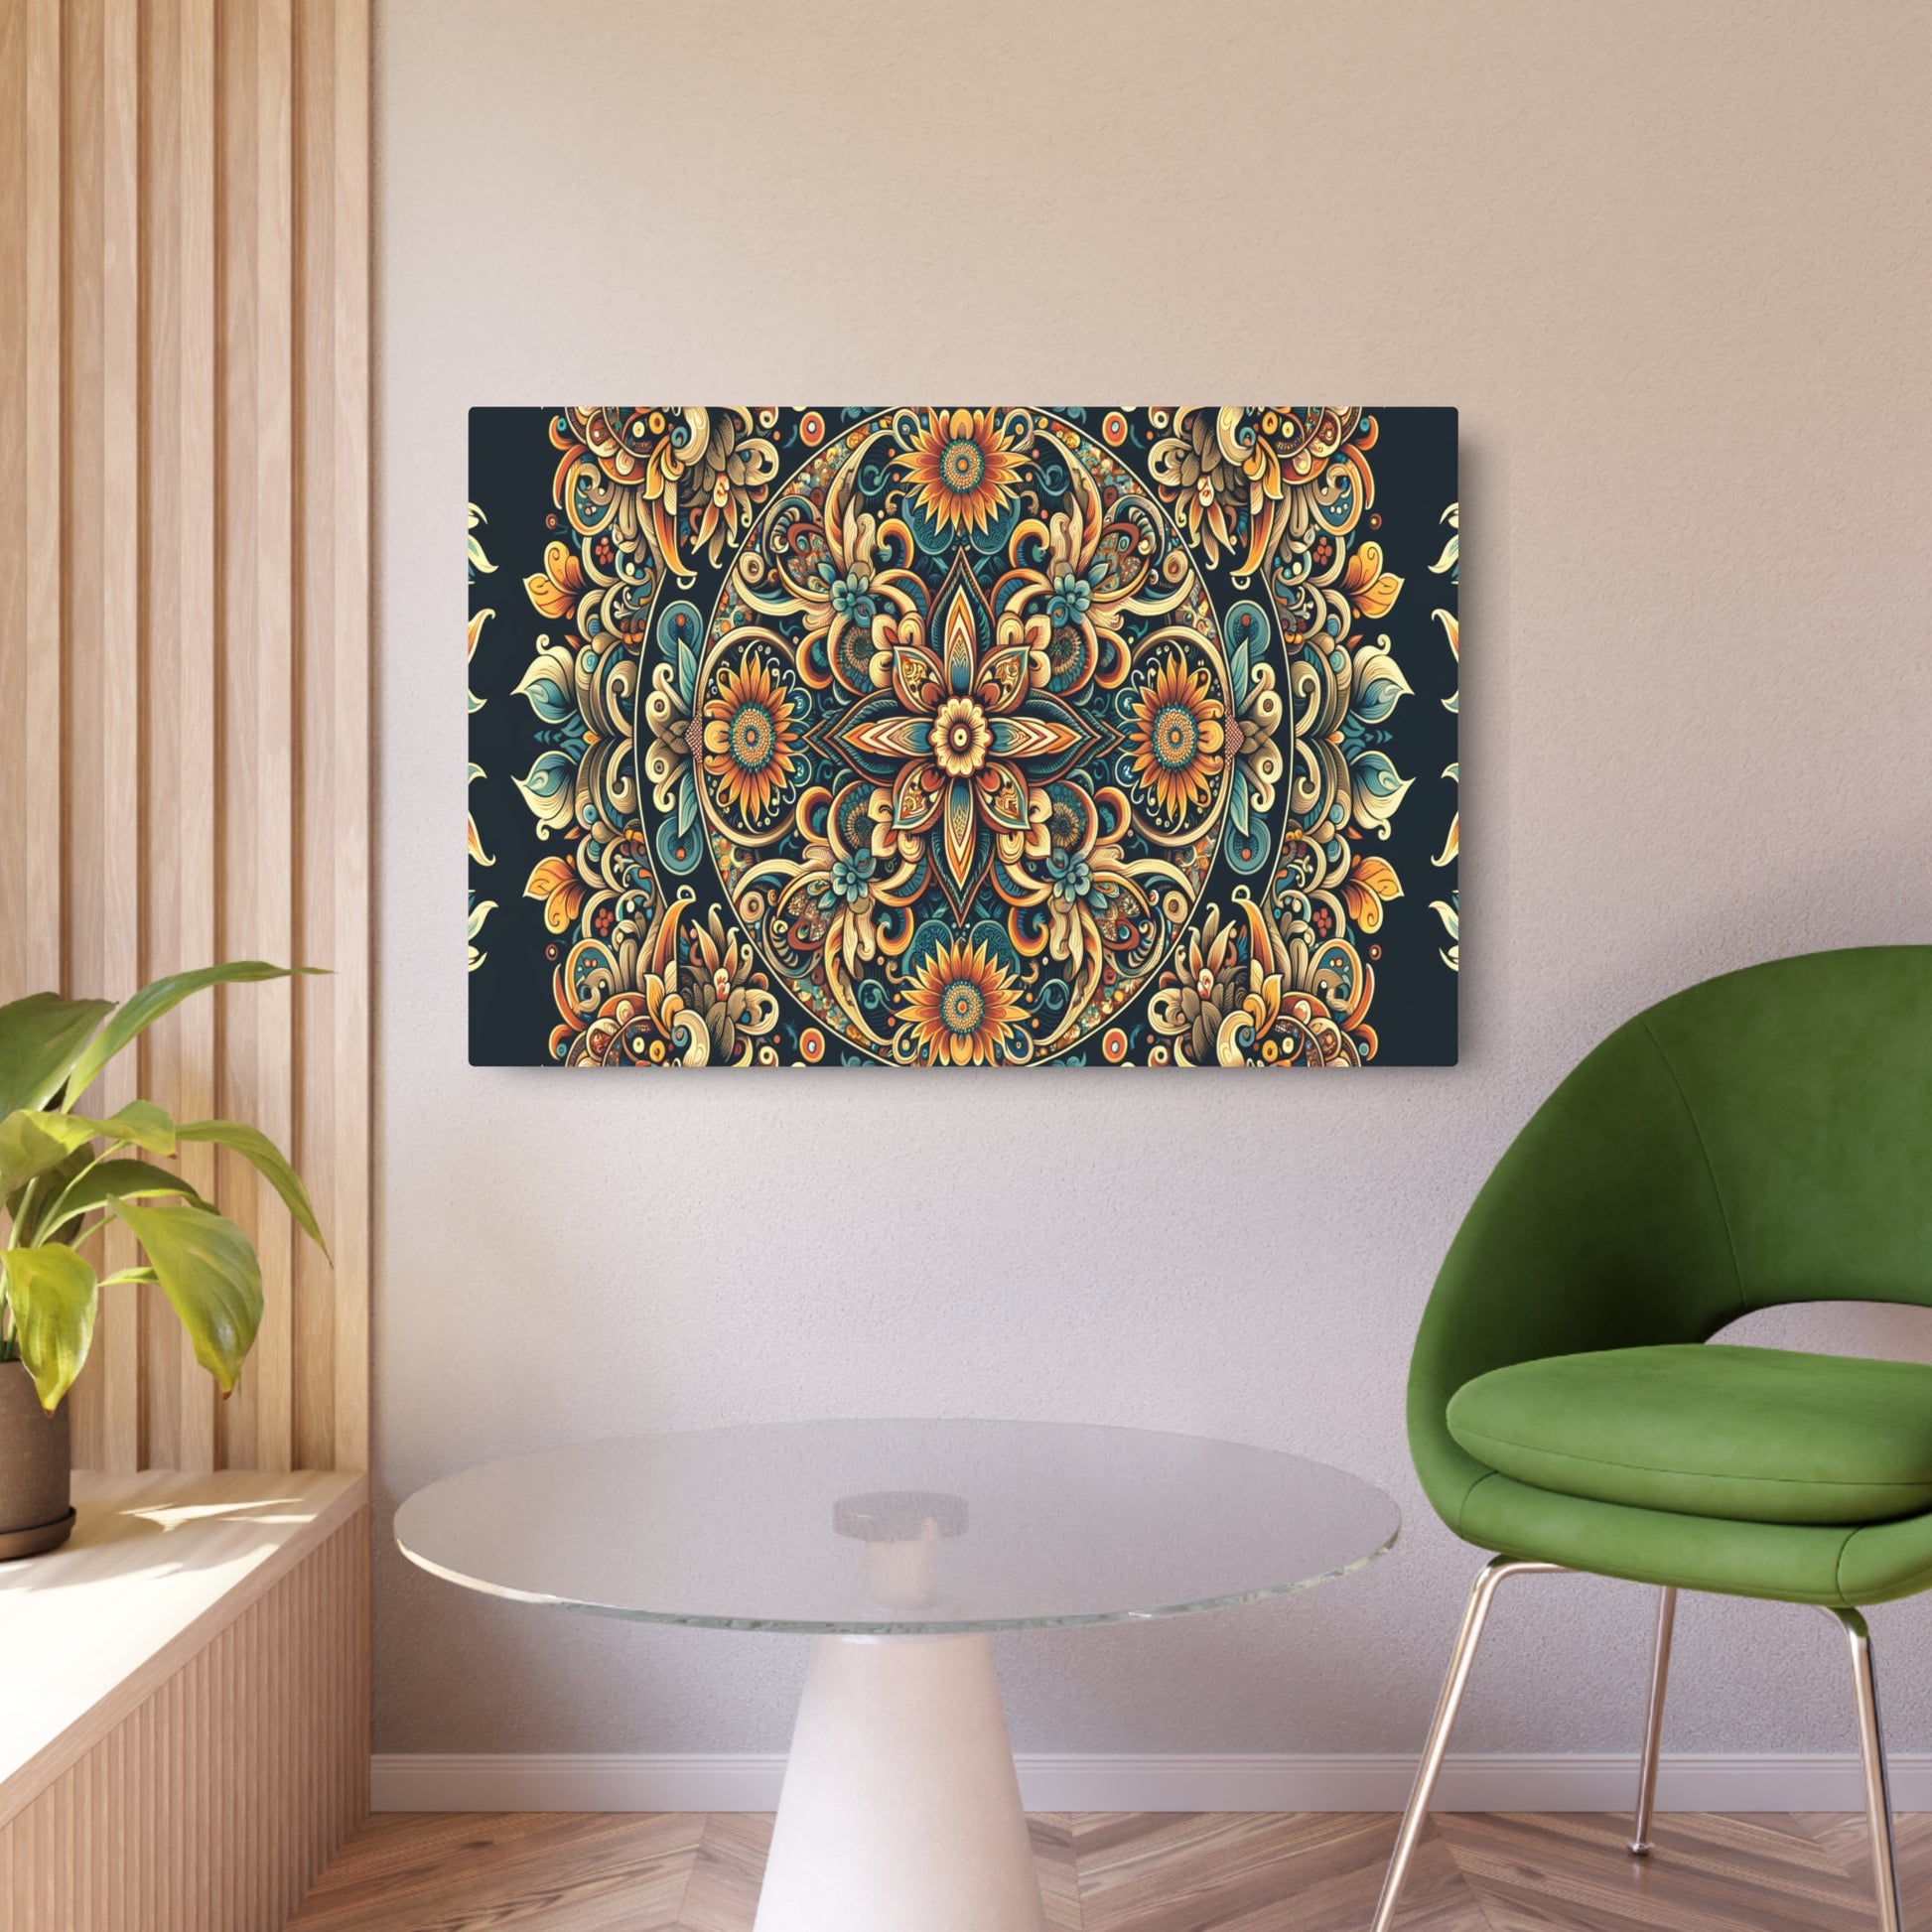 "Intricate Traditional Indonesian Batik Art Design - Authentic Non-Western Global Style" - Metal Poster Art 36″ x 24″ (Horizontal) 0.12''